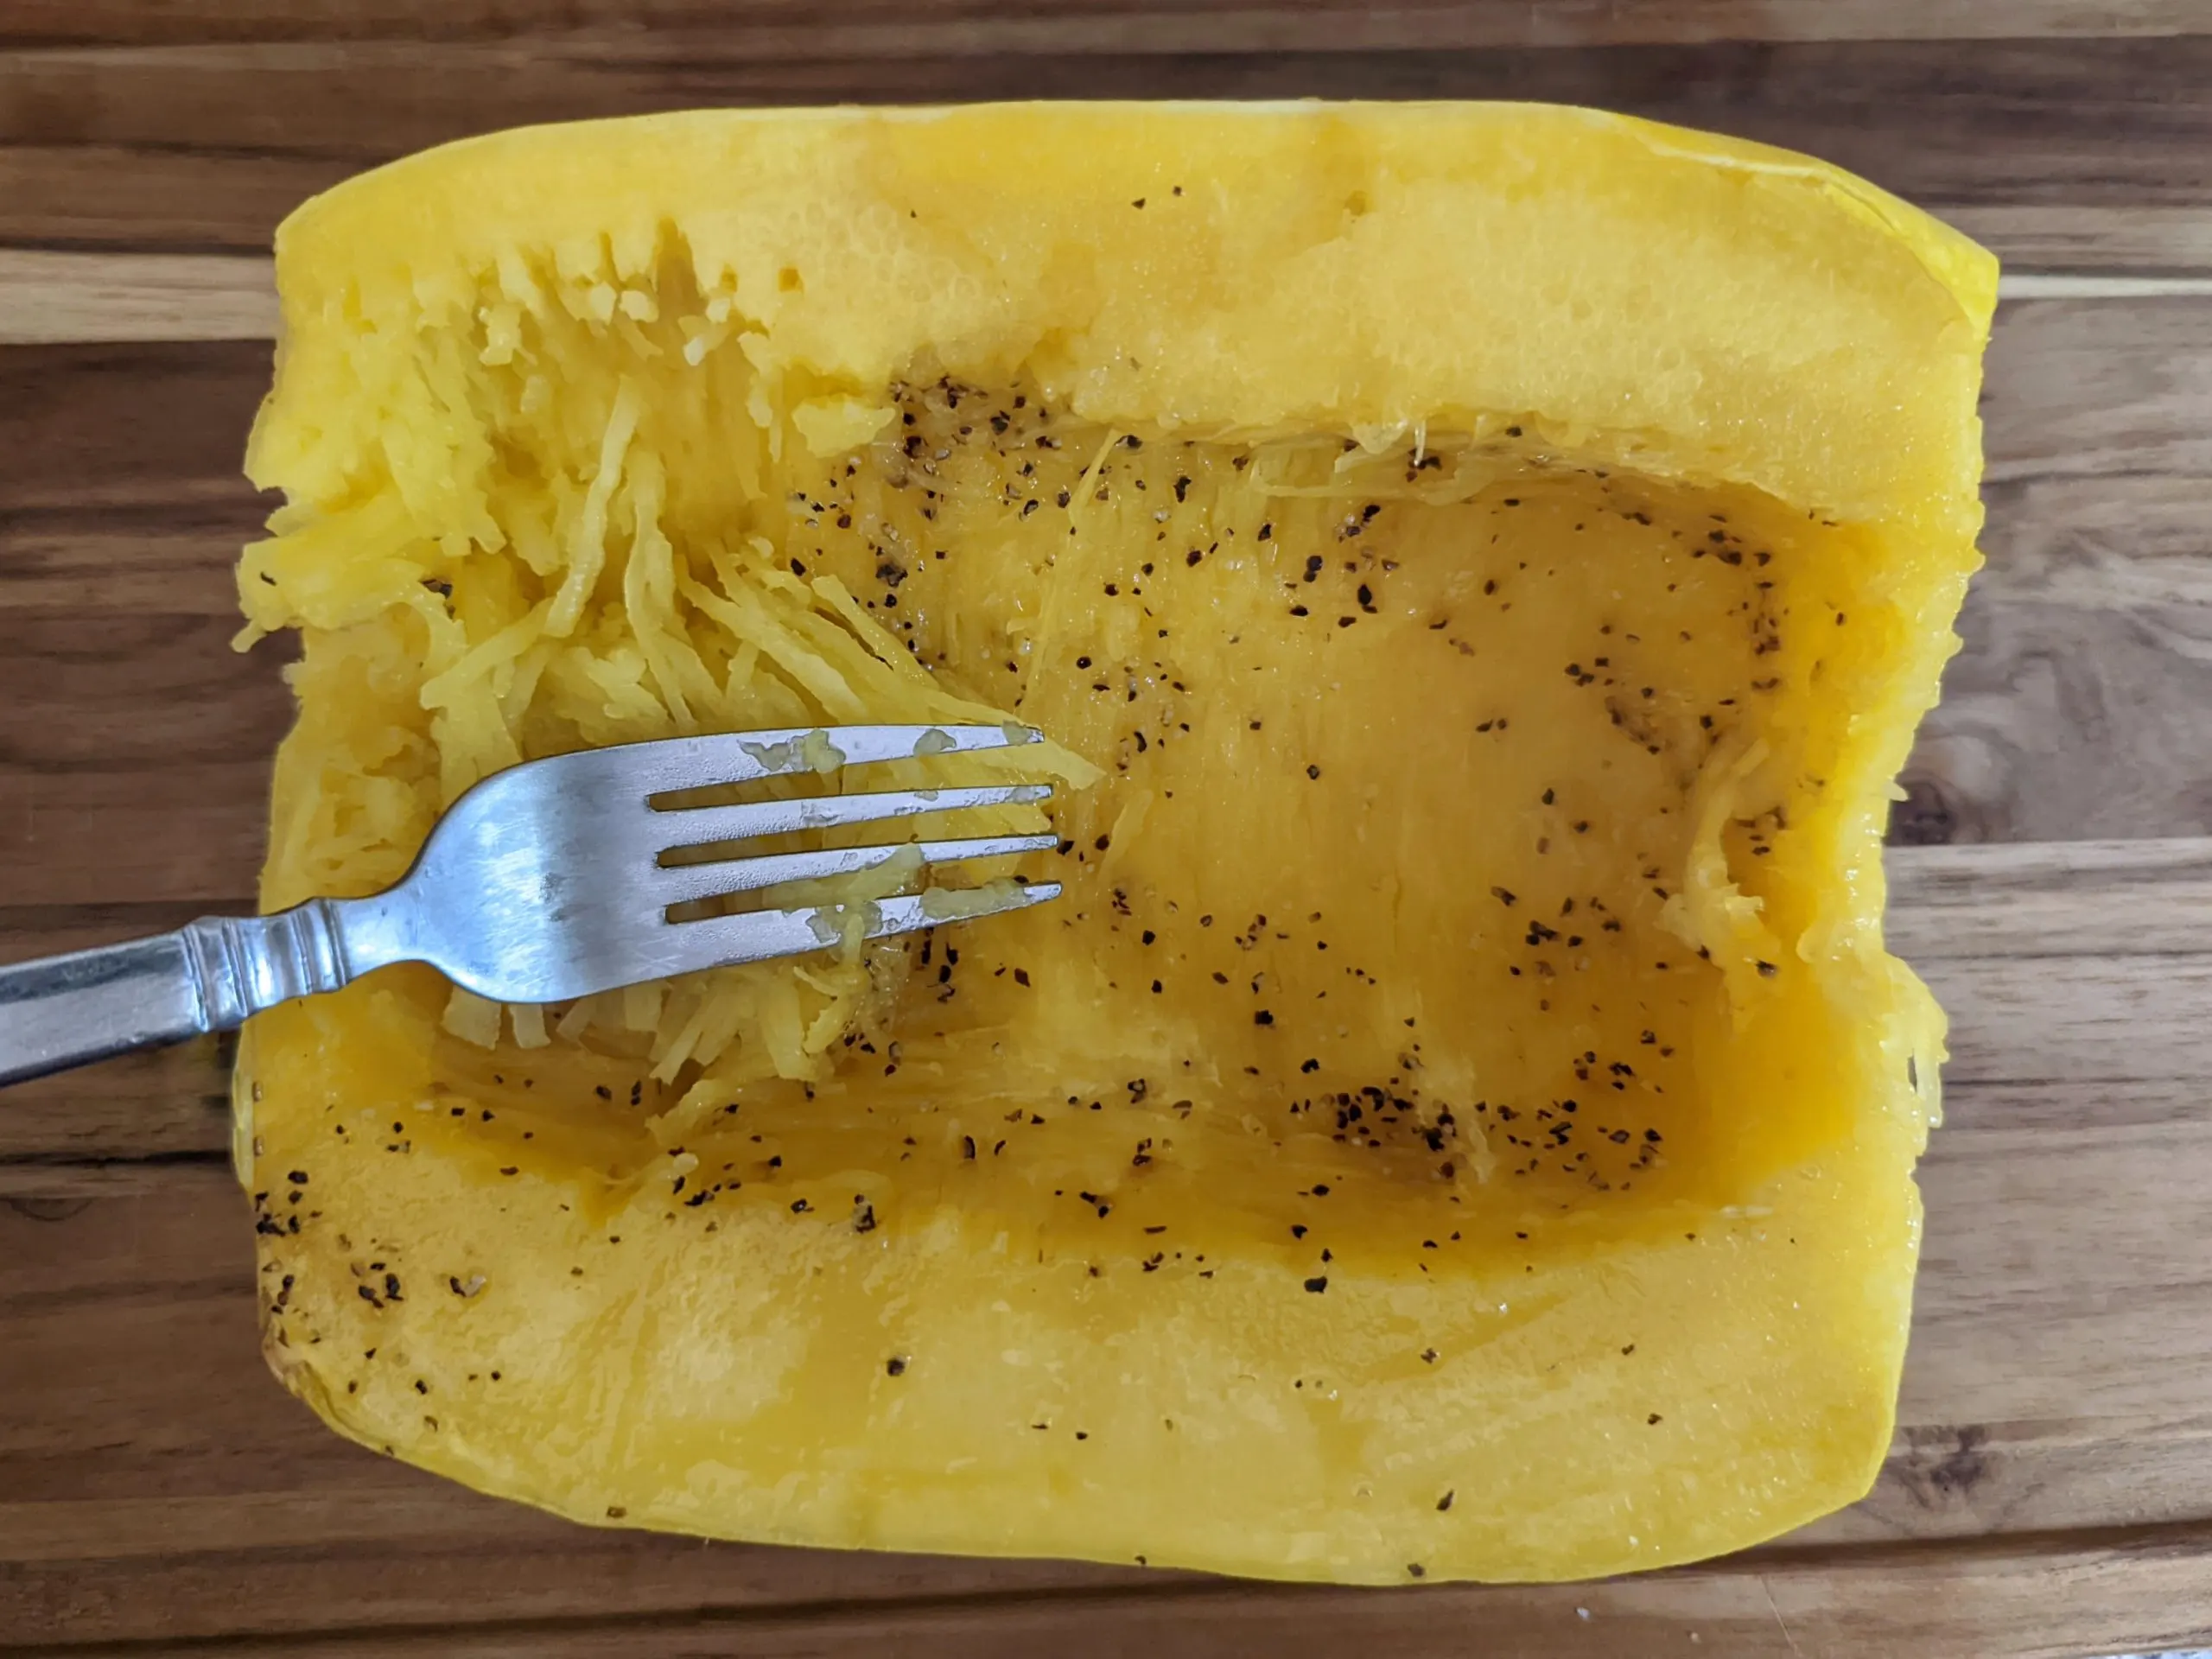 A cooked half of a spaghetti squash being shredded with a fork.